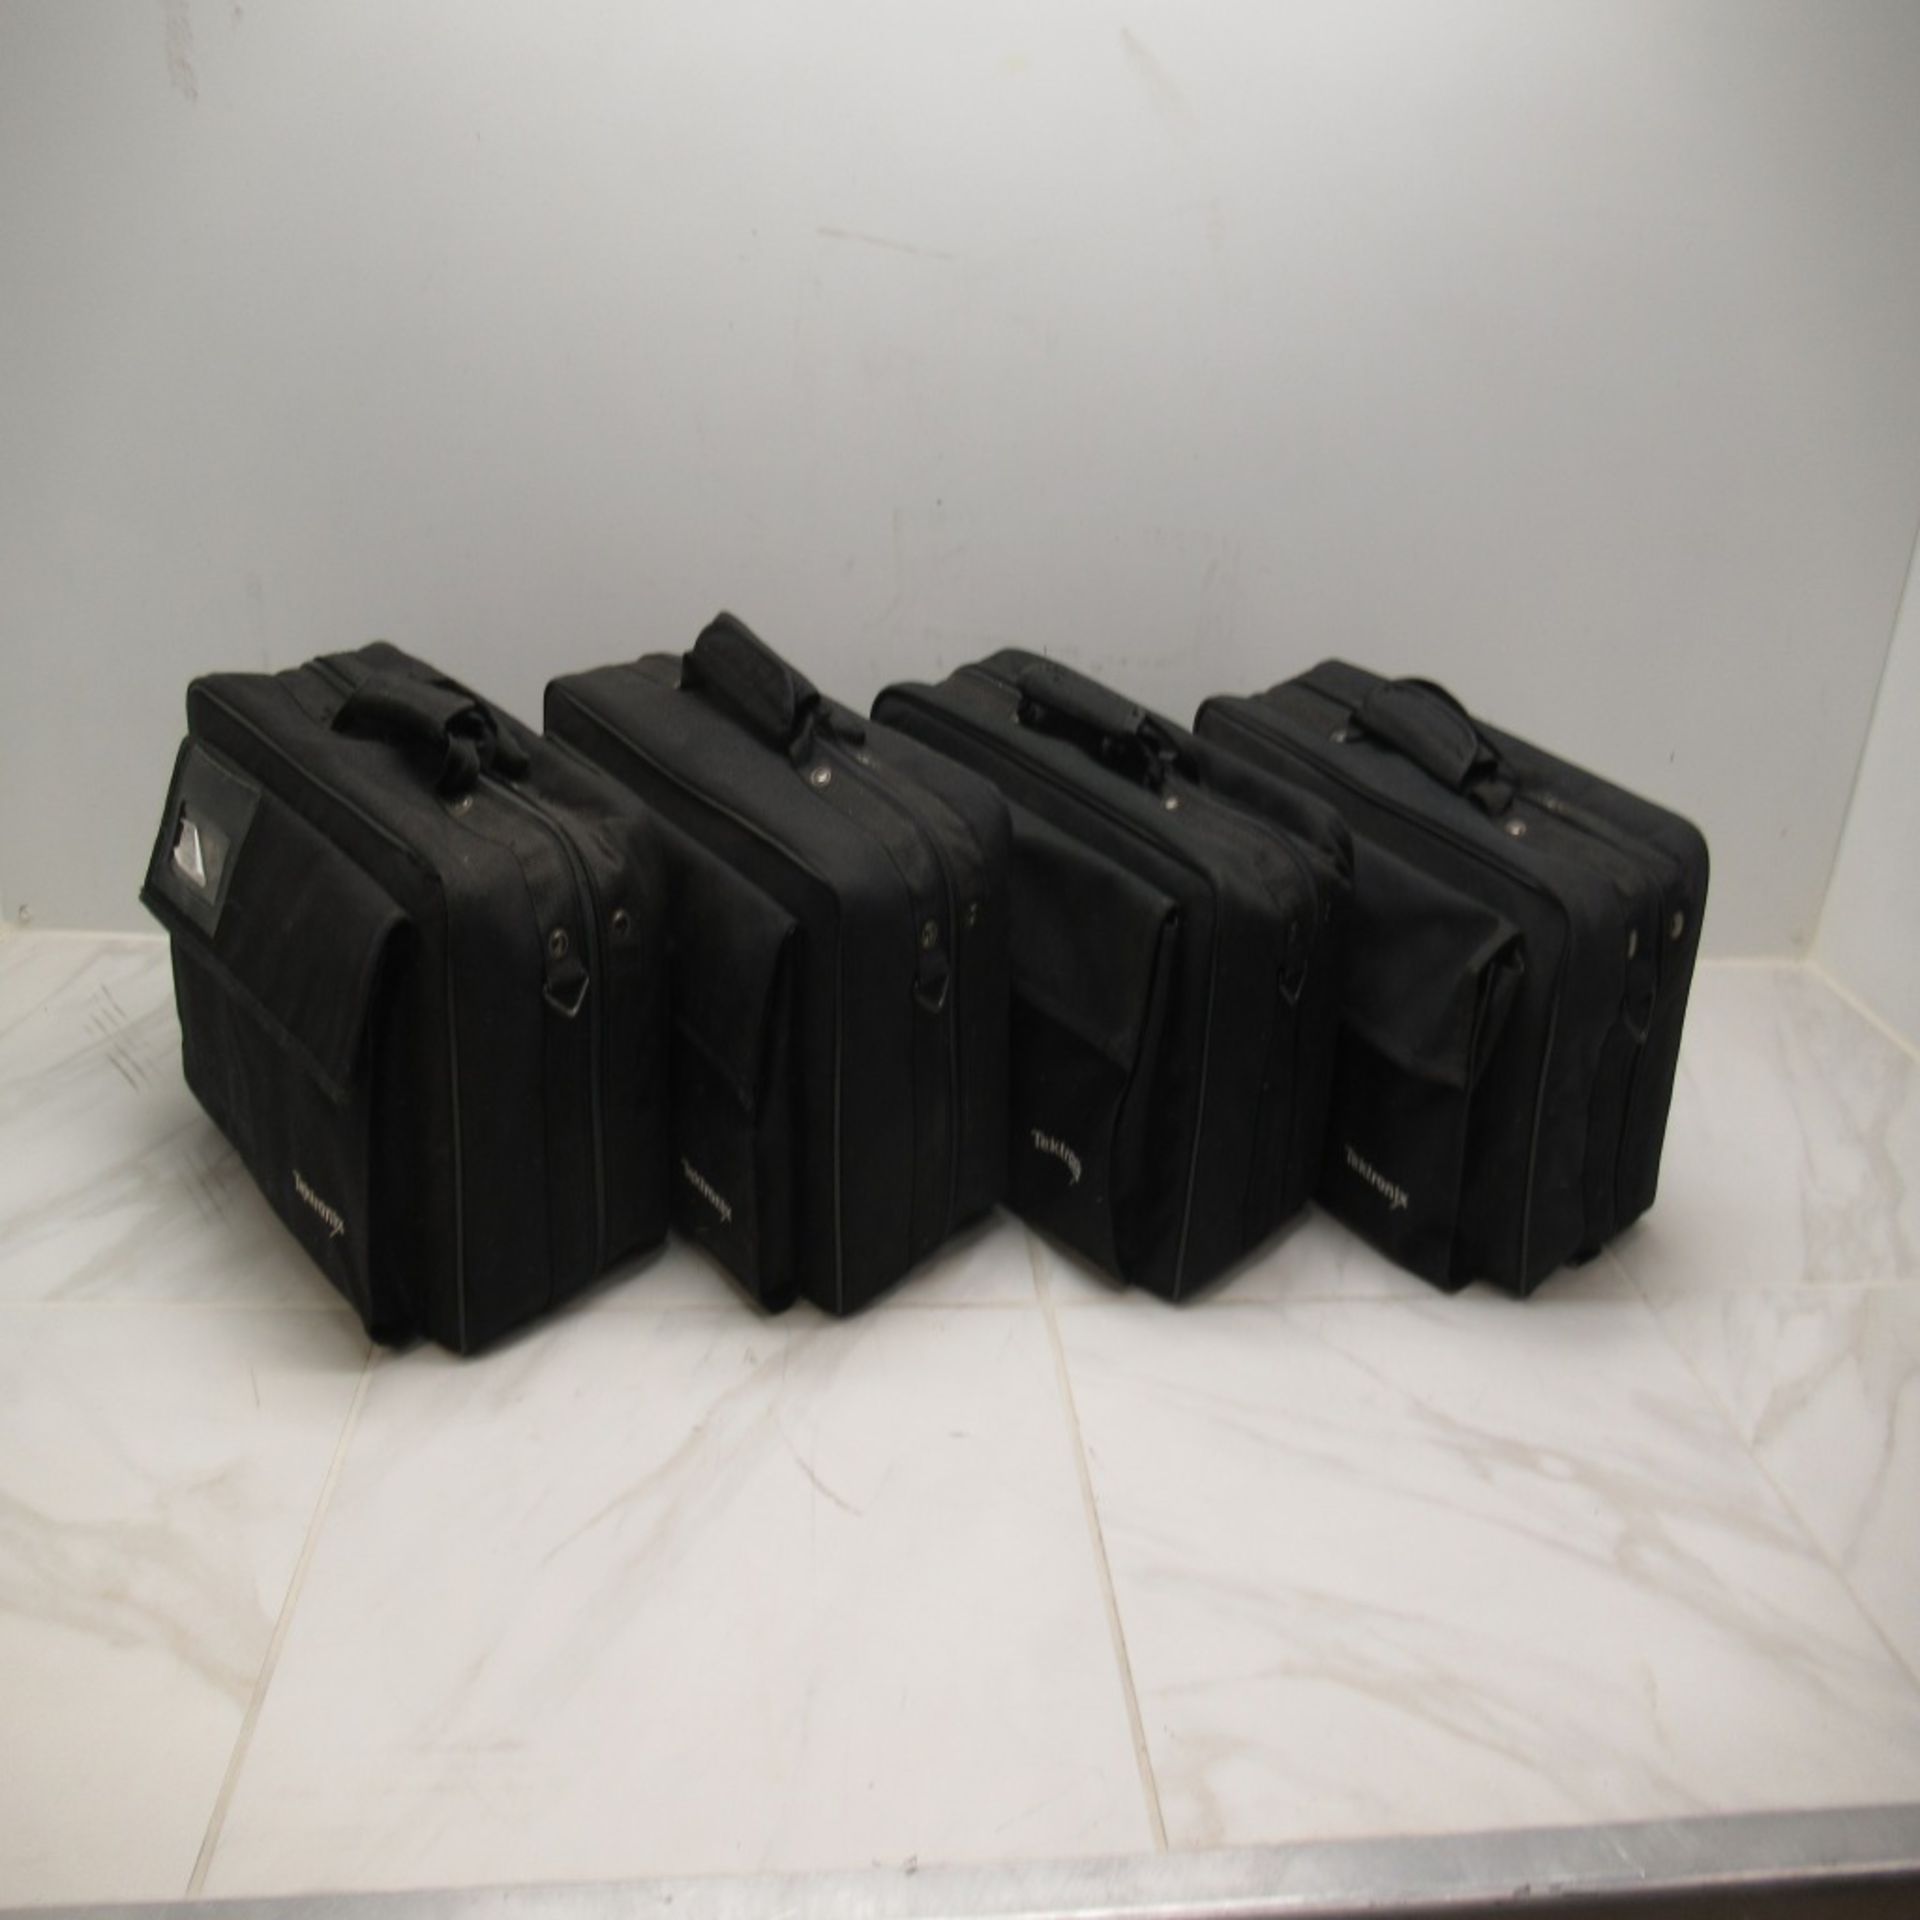 LOT OF 4 TEKTRONIX TDS3012B TWO CHANNEL DIGITAL PHOSPHOR OSCILLOSCOPES, WITH PADDED CARRY CASES AND - Image 14 of 14